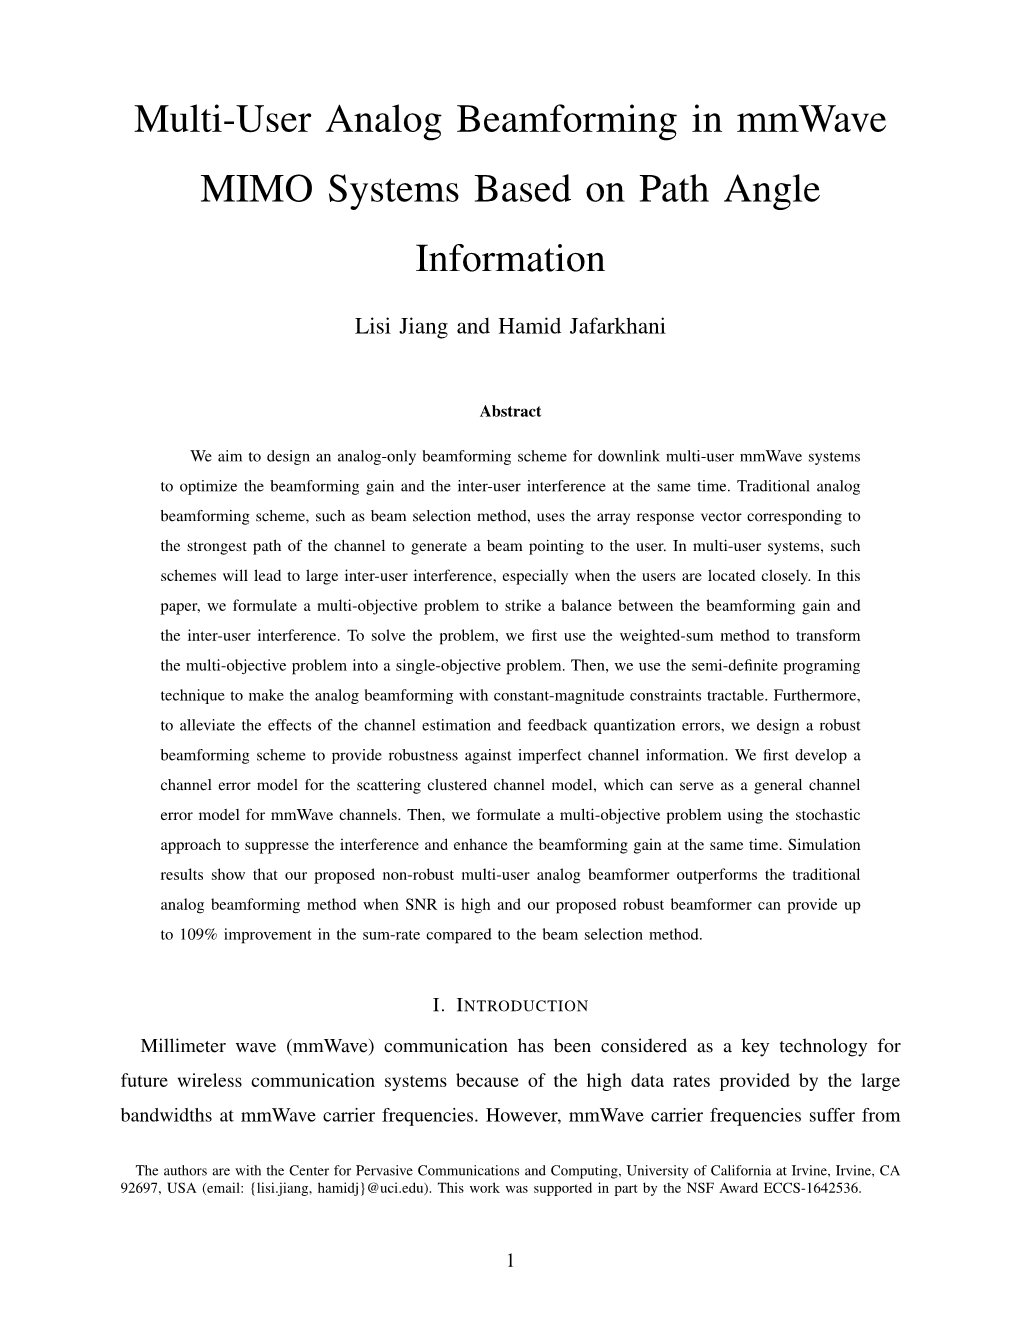 Multi-User Analog Beamforming in Mmwave MIMO Systems Based on Path Angle Information